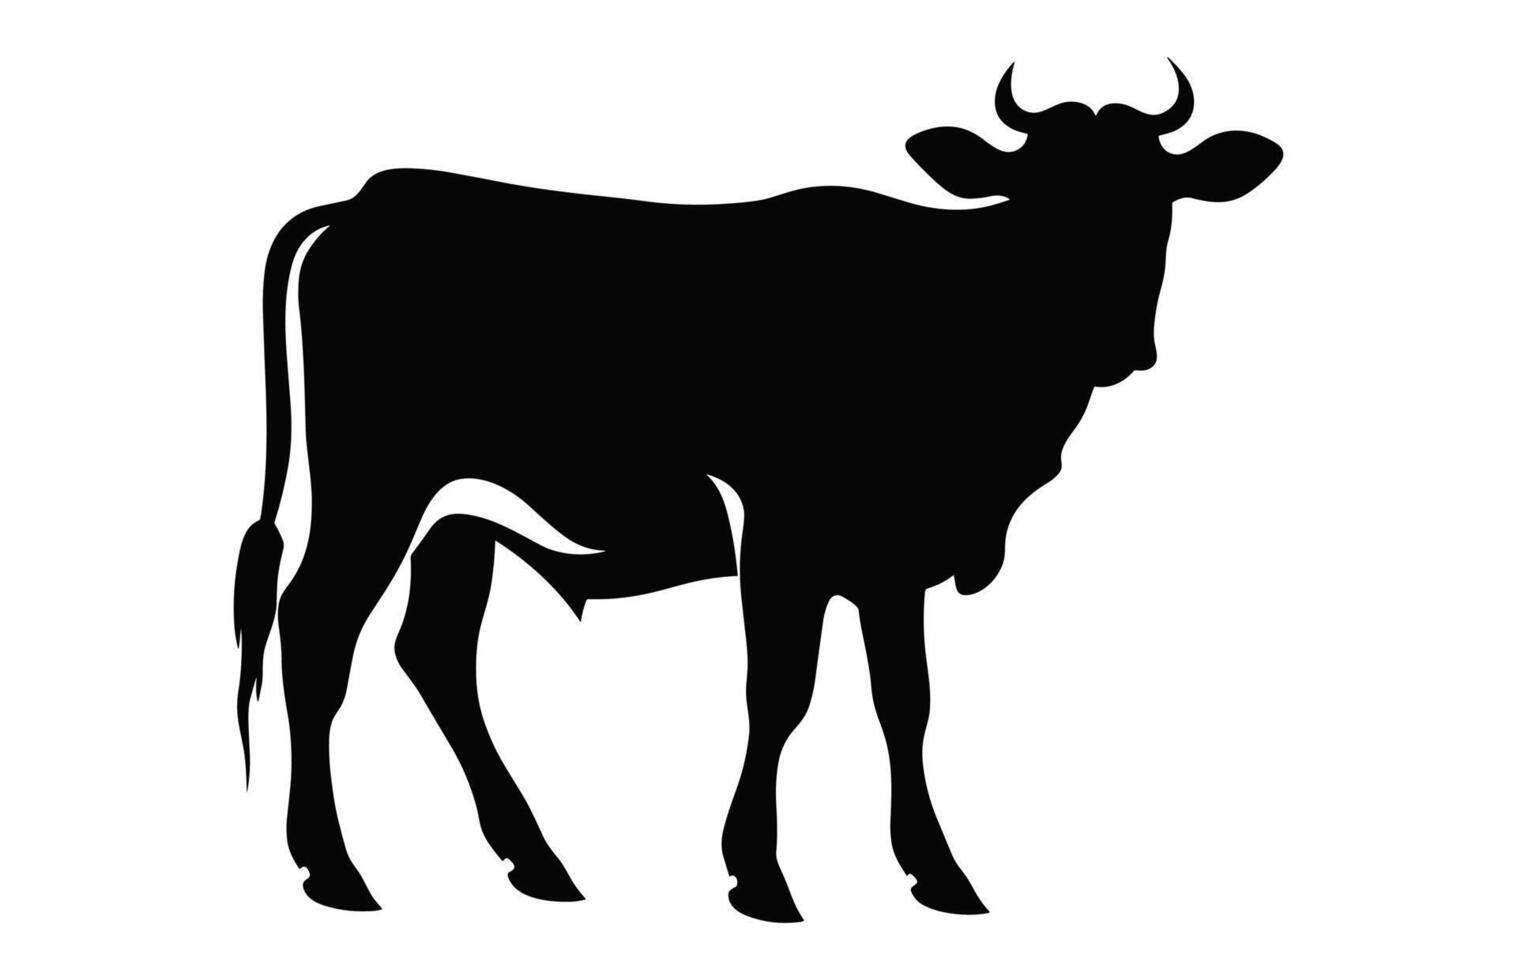 Cow black Silhouette Vector isolated on a white background